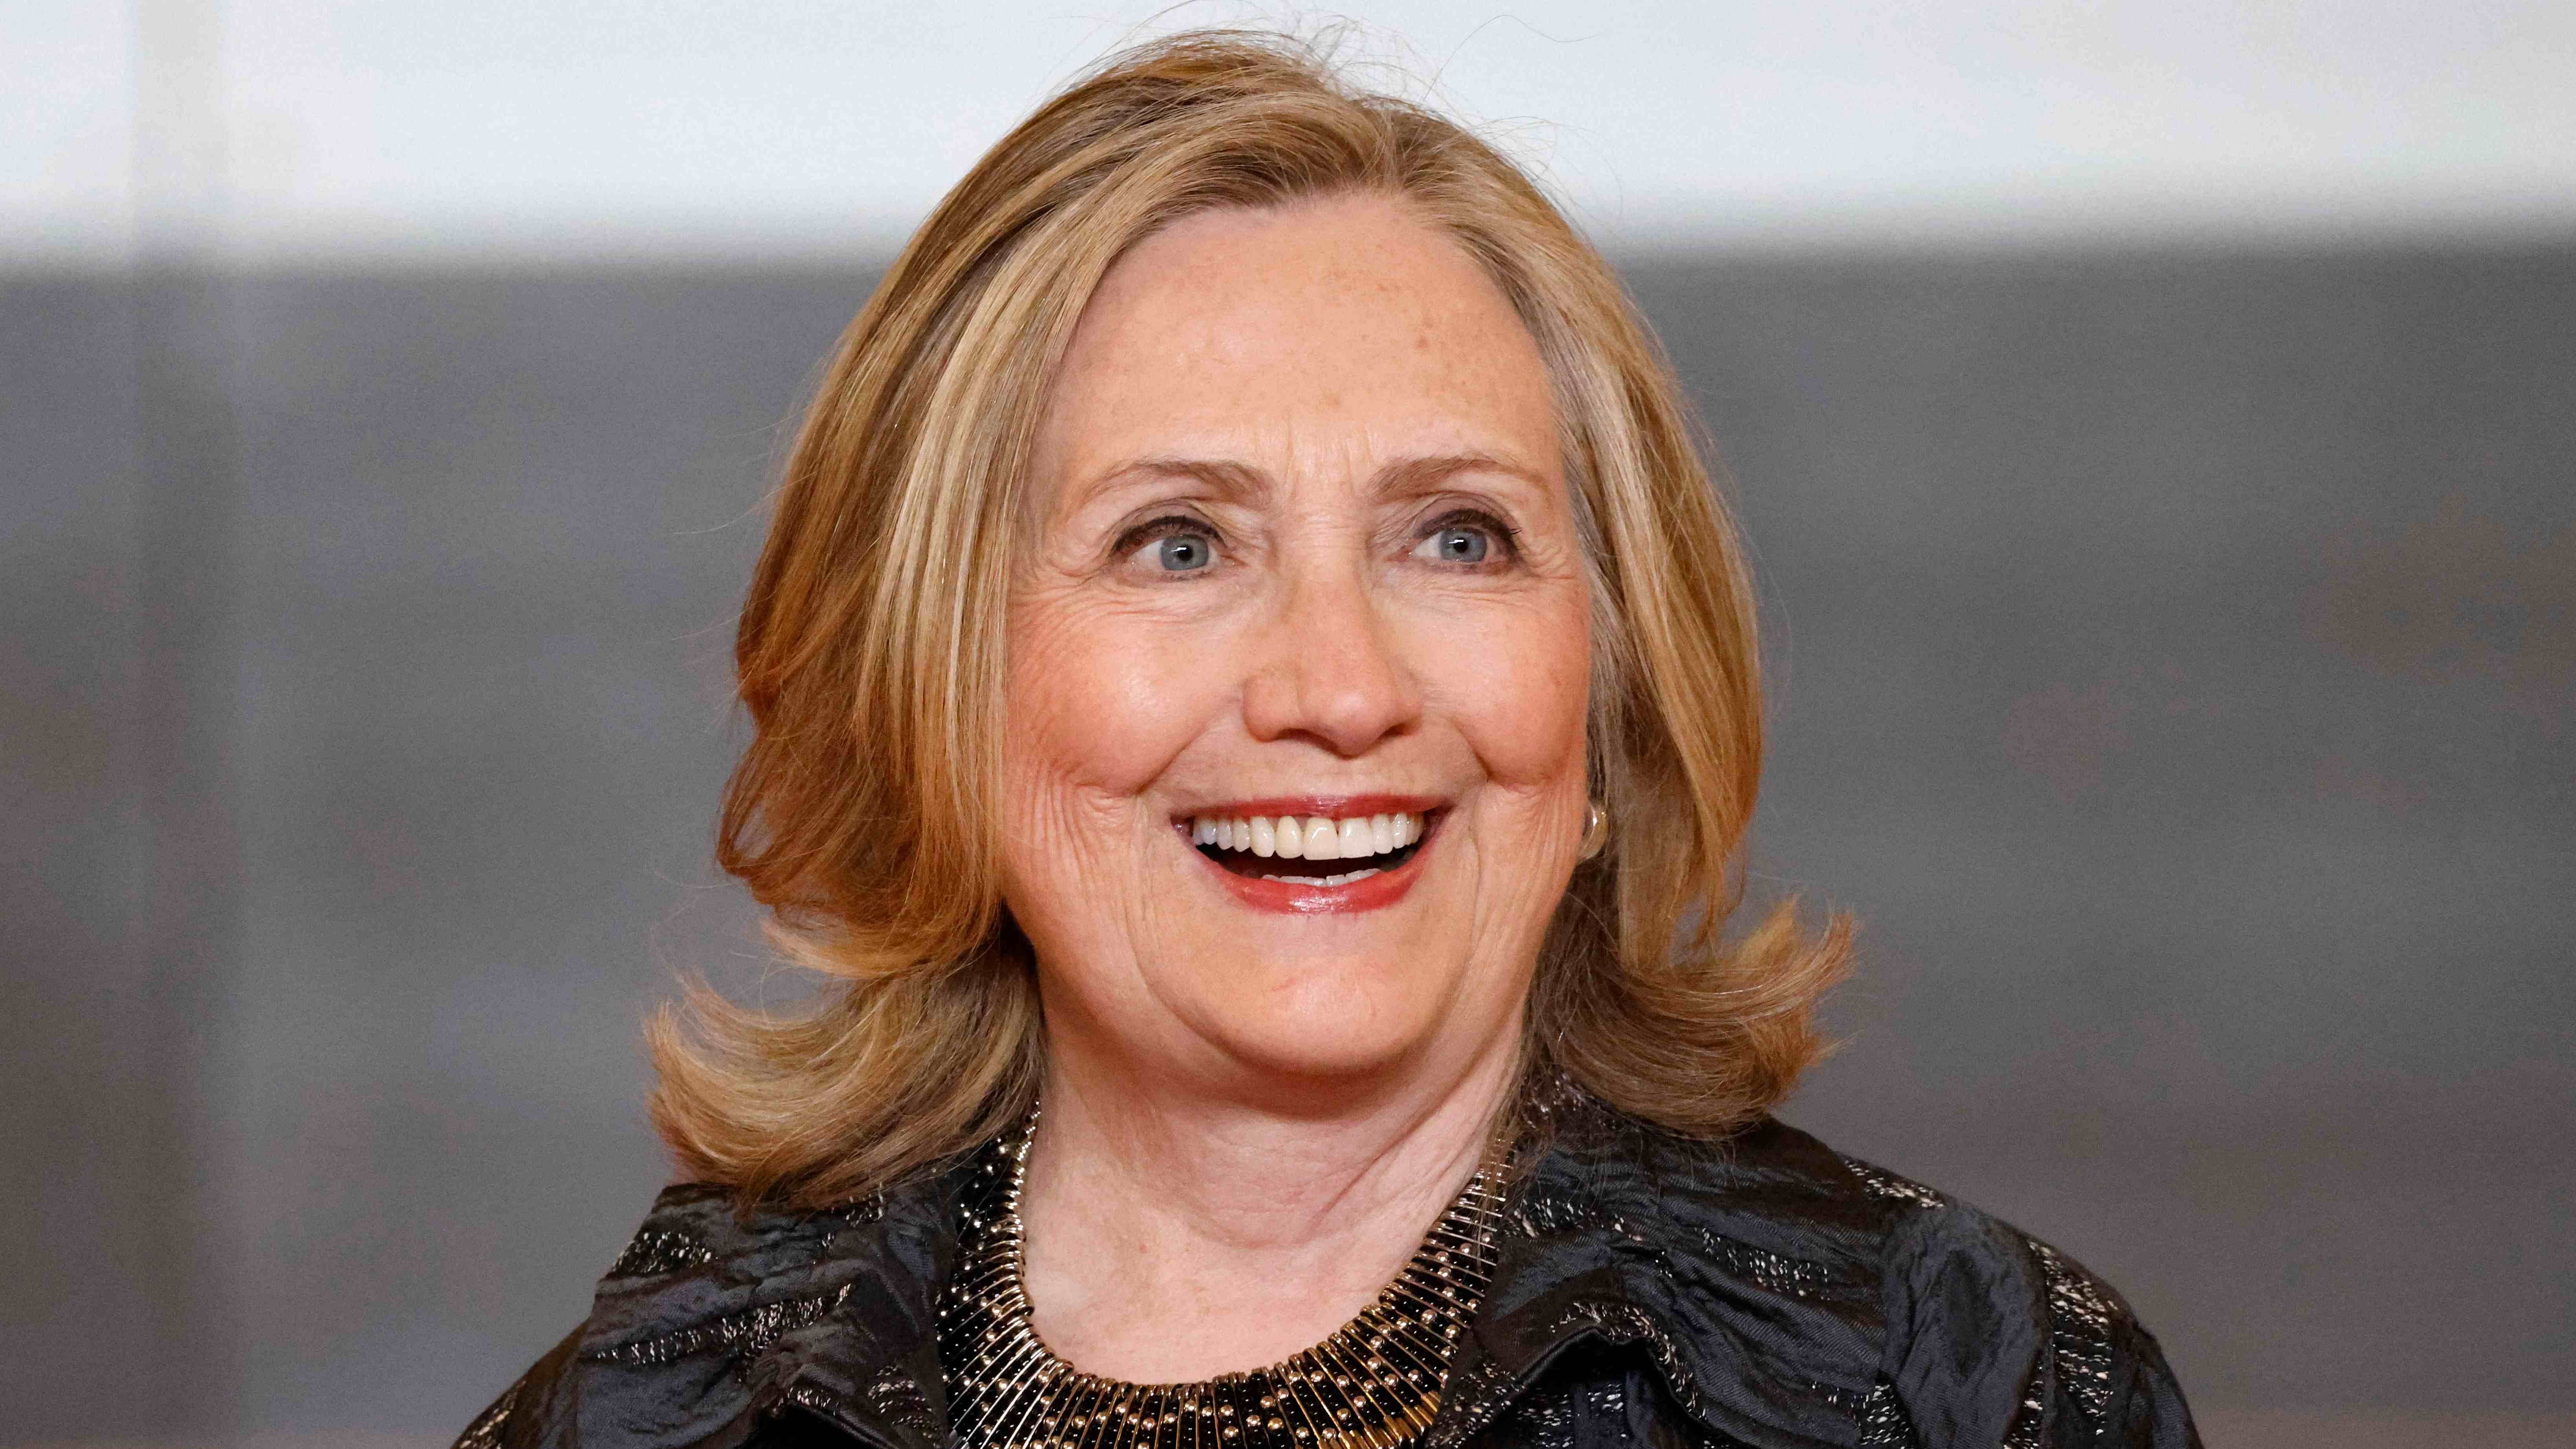 Former US Secretary of State Hillary Clinton. Credit: AFP Photo